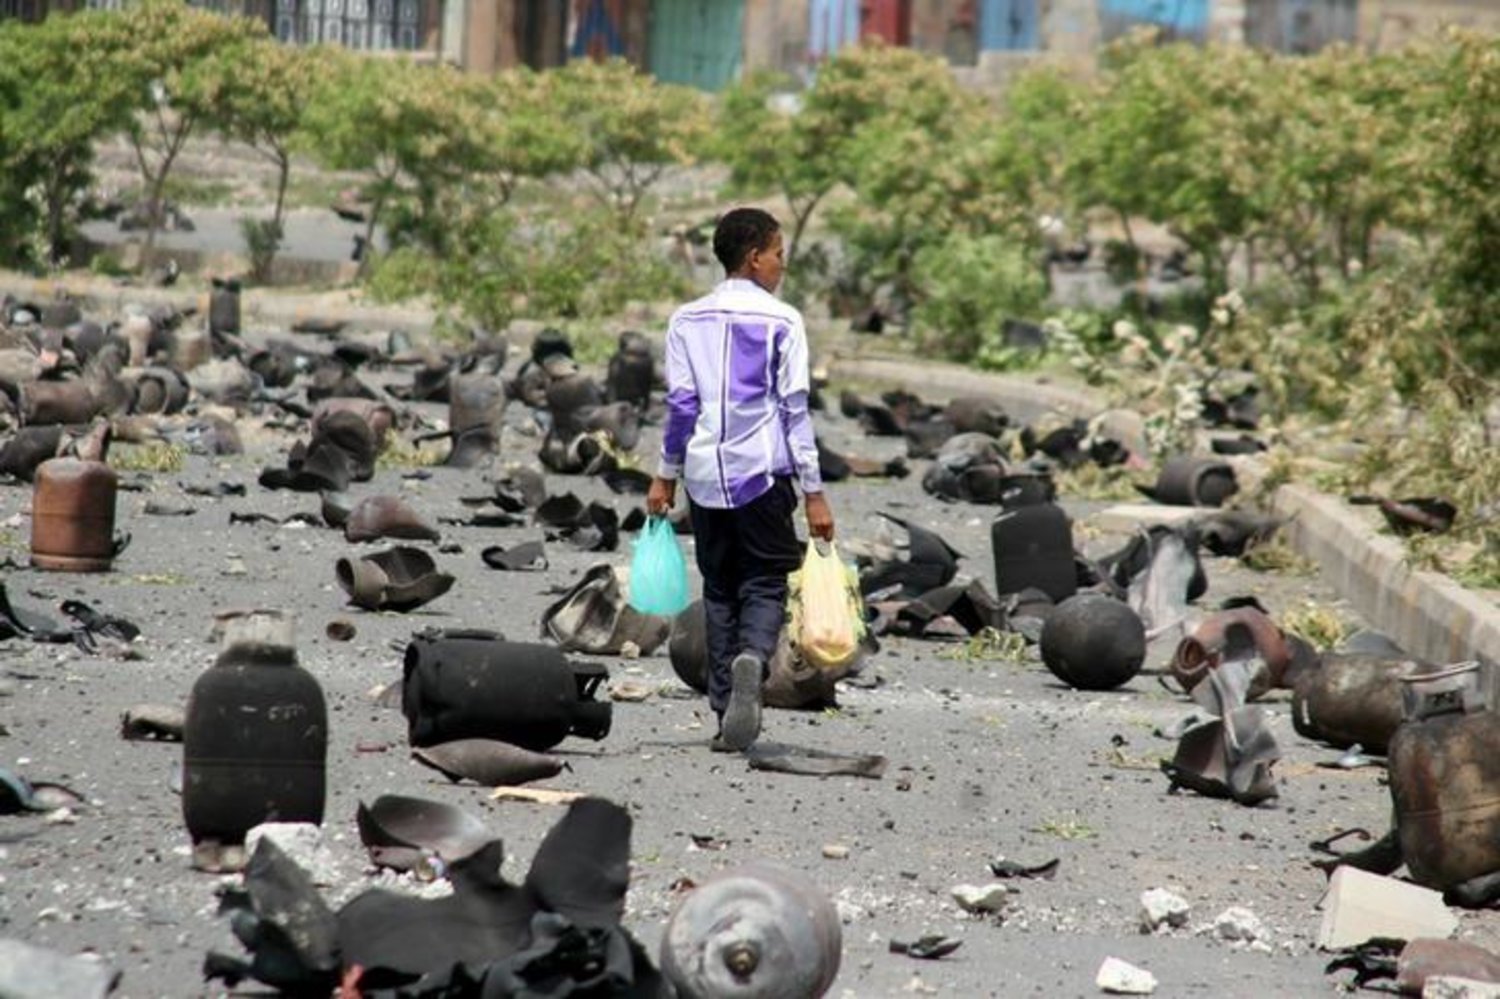 A boy walks on a street littered with cooking gas cylinders after a fire and explosions destroyed a nearby gas storage in Yemen's southwestern city of Taiz July 19, 2015. REUTERS/Stringer/Files